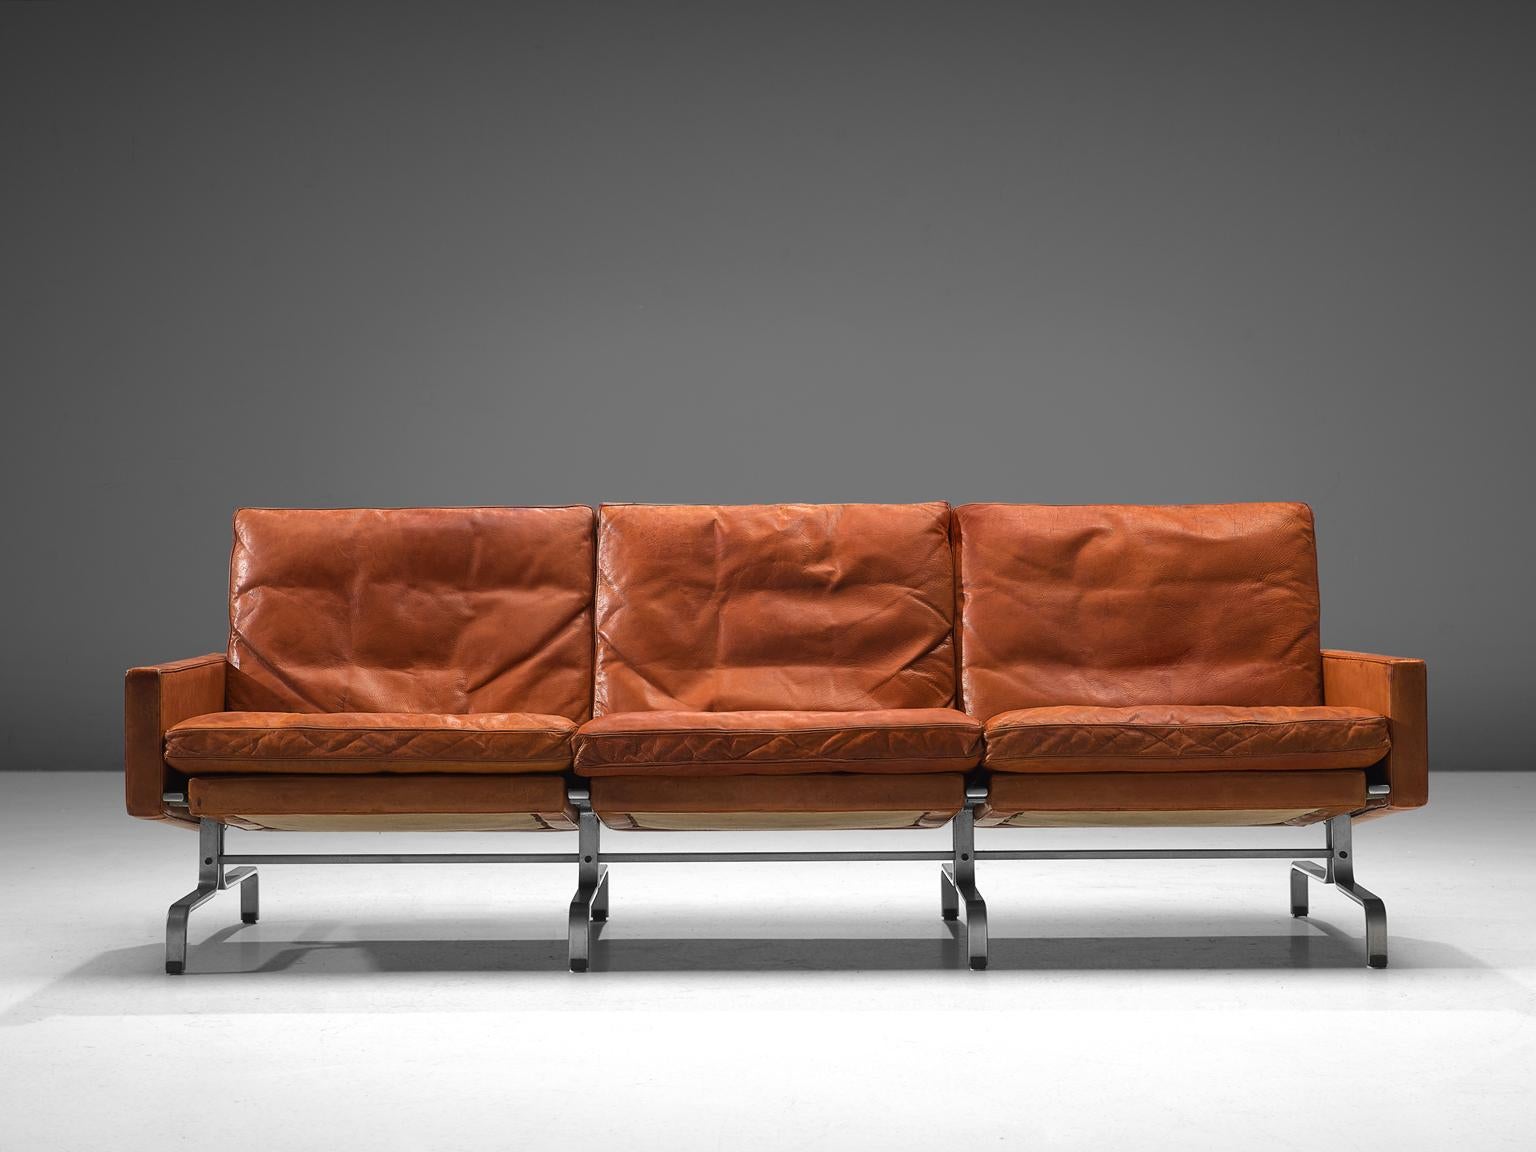 Poul Kjaerholm for E. Kold Christensen, three-seat sofa PK 31, leather and metal, Denmark, 1958.

Beautiful aged PK31 sofa in cognac leather by Poul Kjaerholm for E. Kold Christensen. This sofa features Poul Kjaerholm’s ability to work with